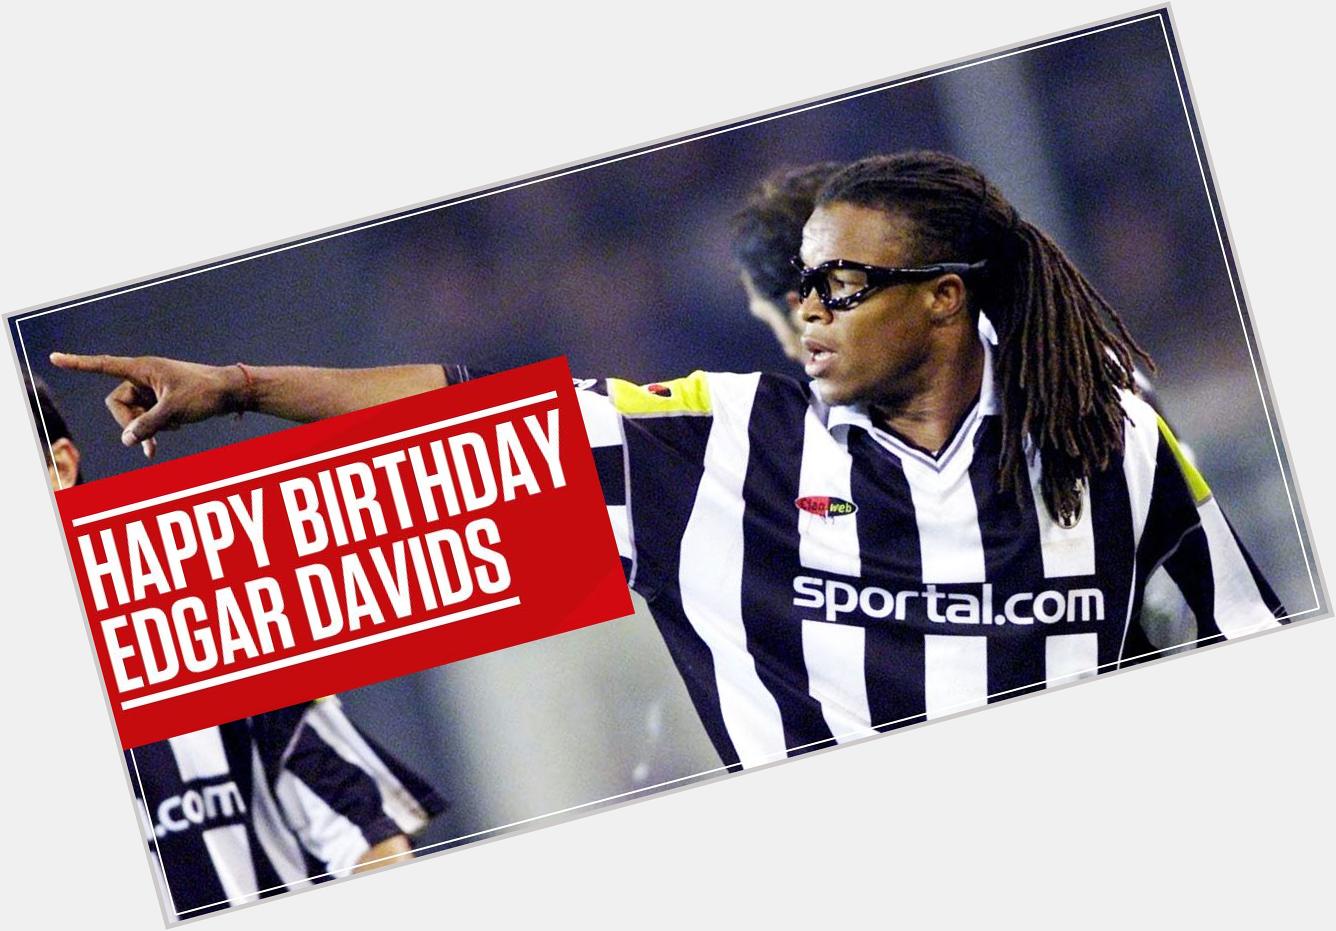 He\s won the Champions League and managed Barnet FC, it\s a very happy birthday to midfield dynamo Edgar Davids! 